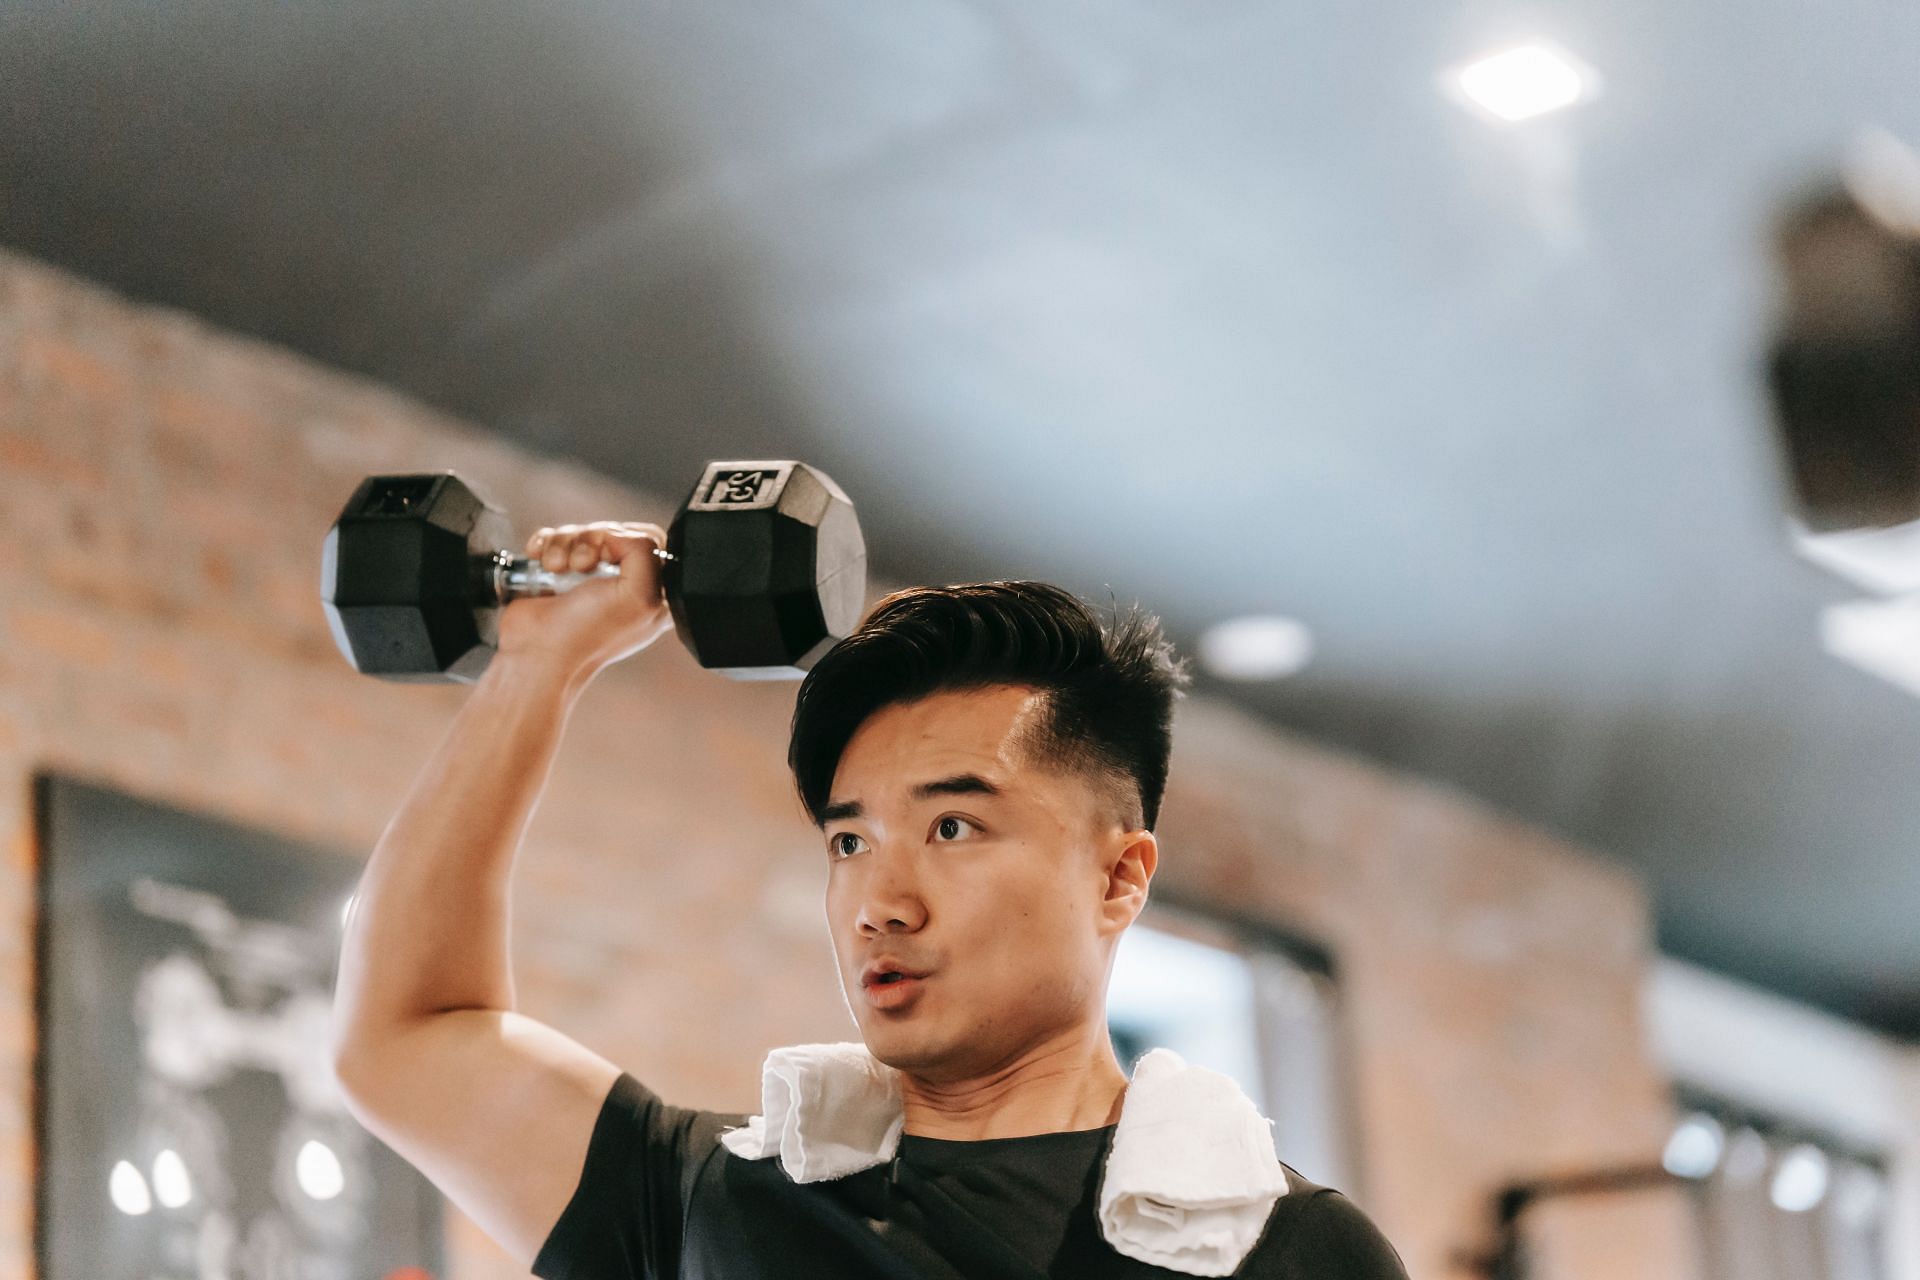 Working out the external rotation movement of your shoulders is important for maintaining shoulder health (Image via Pexels @Andres Ayrton)